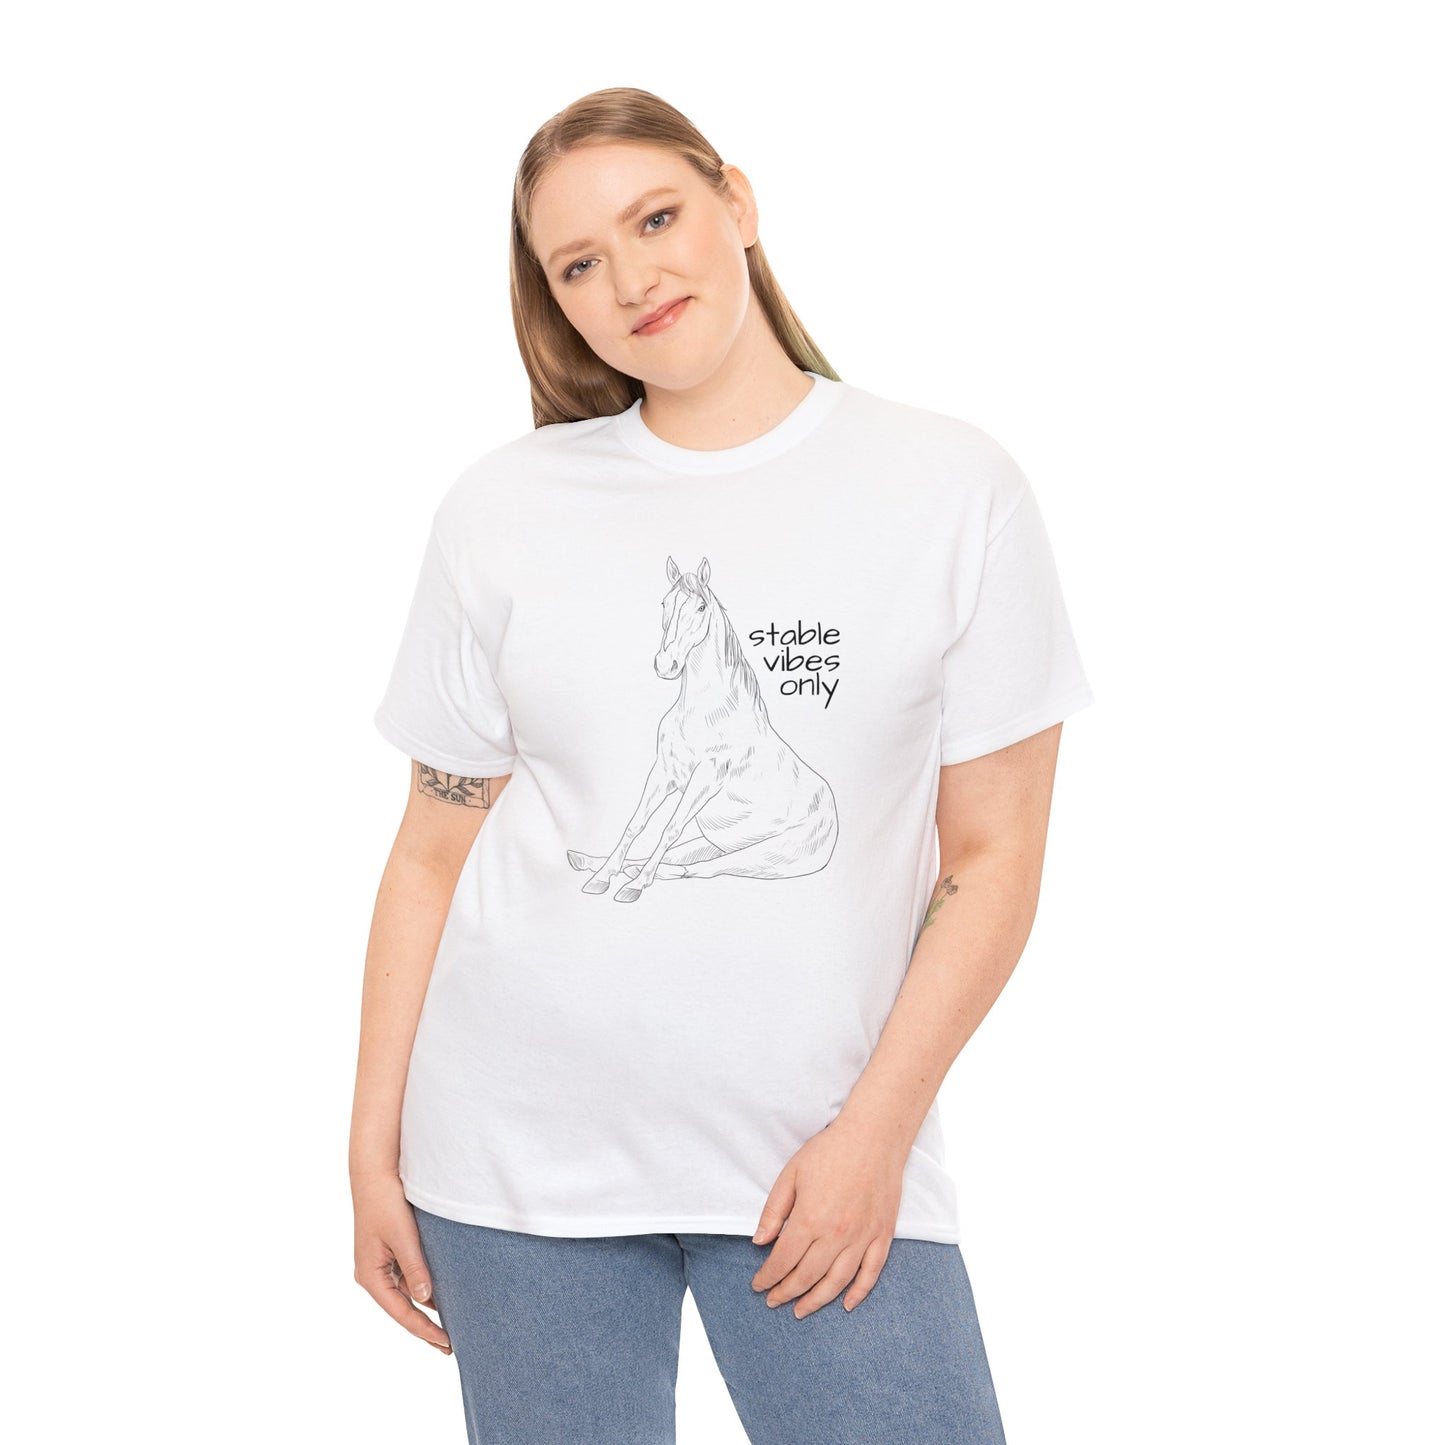 Jeezy - Stable Vibes Only - Sitting Horse - Unisex Cotton Tee - Made in the USA